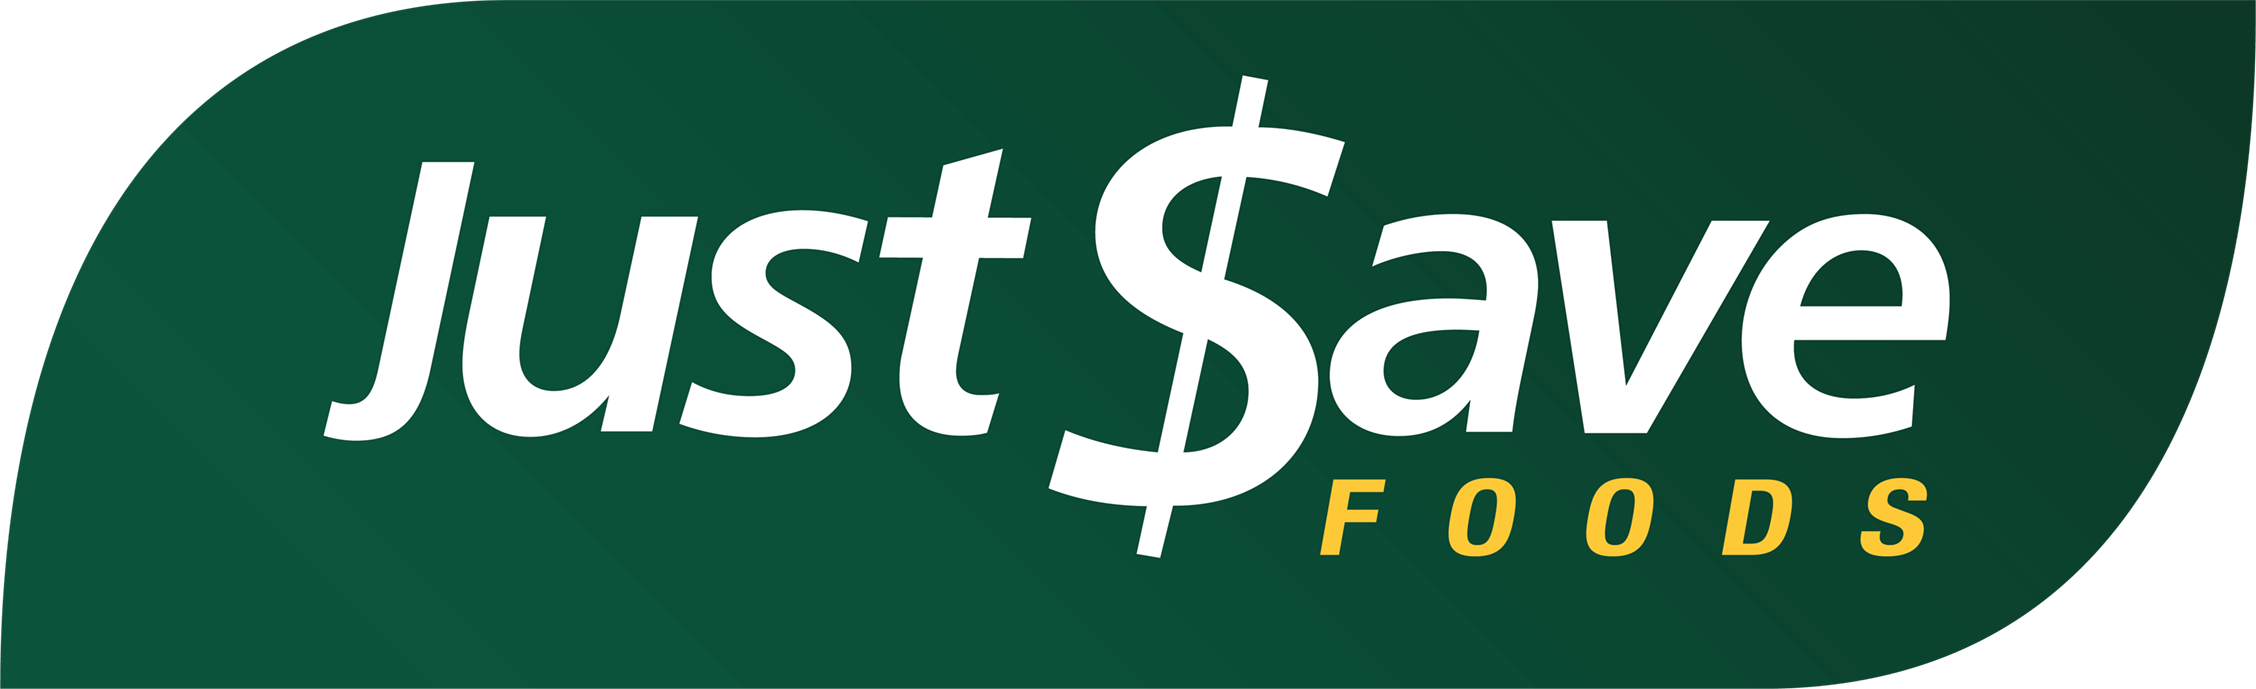 A theme logo of Just Save